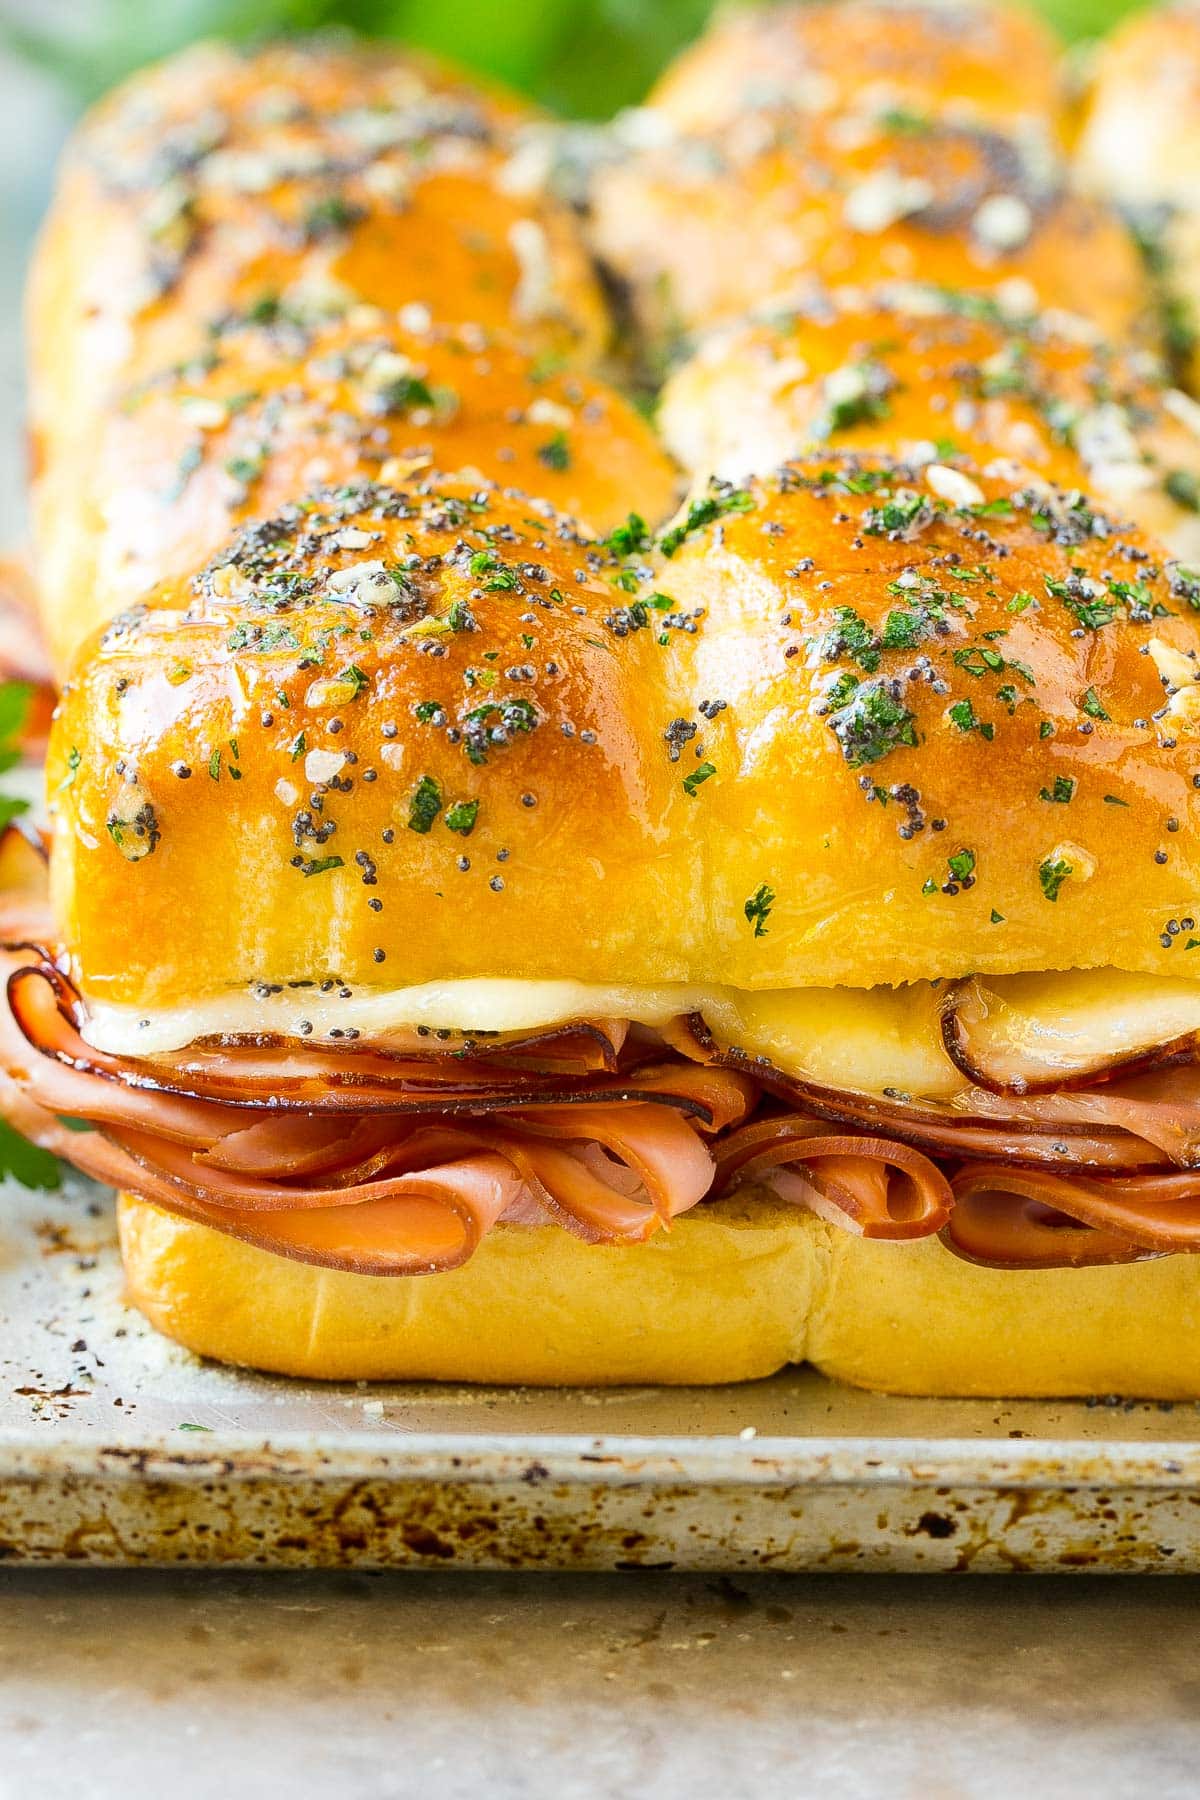 Baked ham and cheese sliders on a pan, topped with parsley.